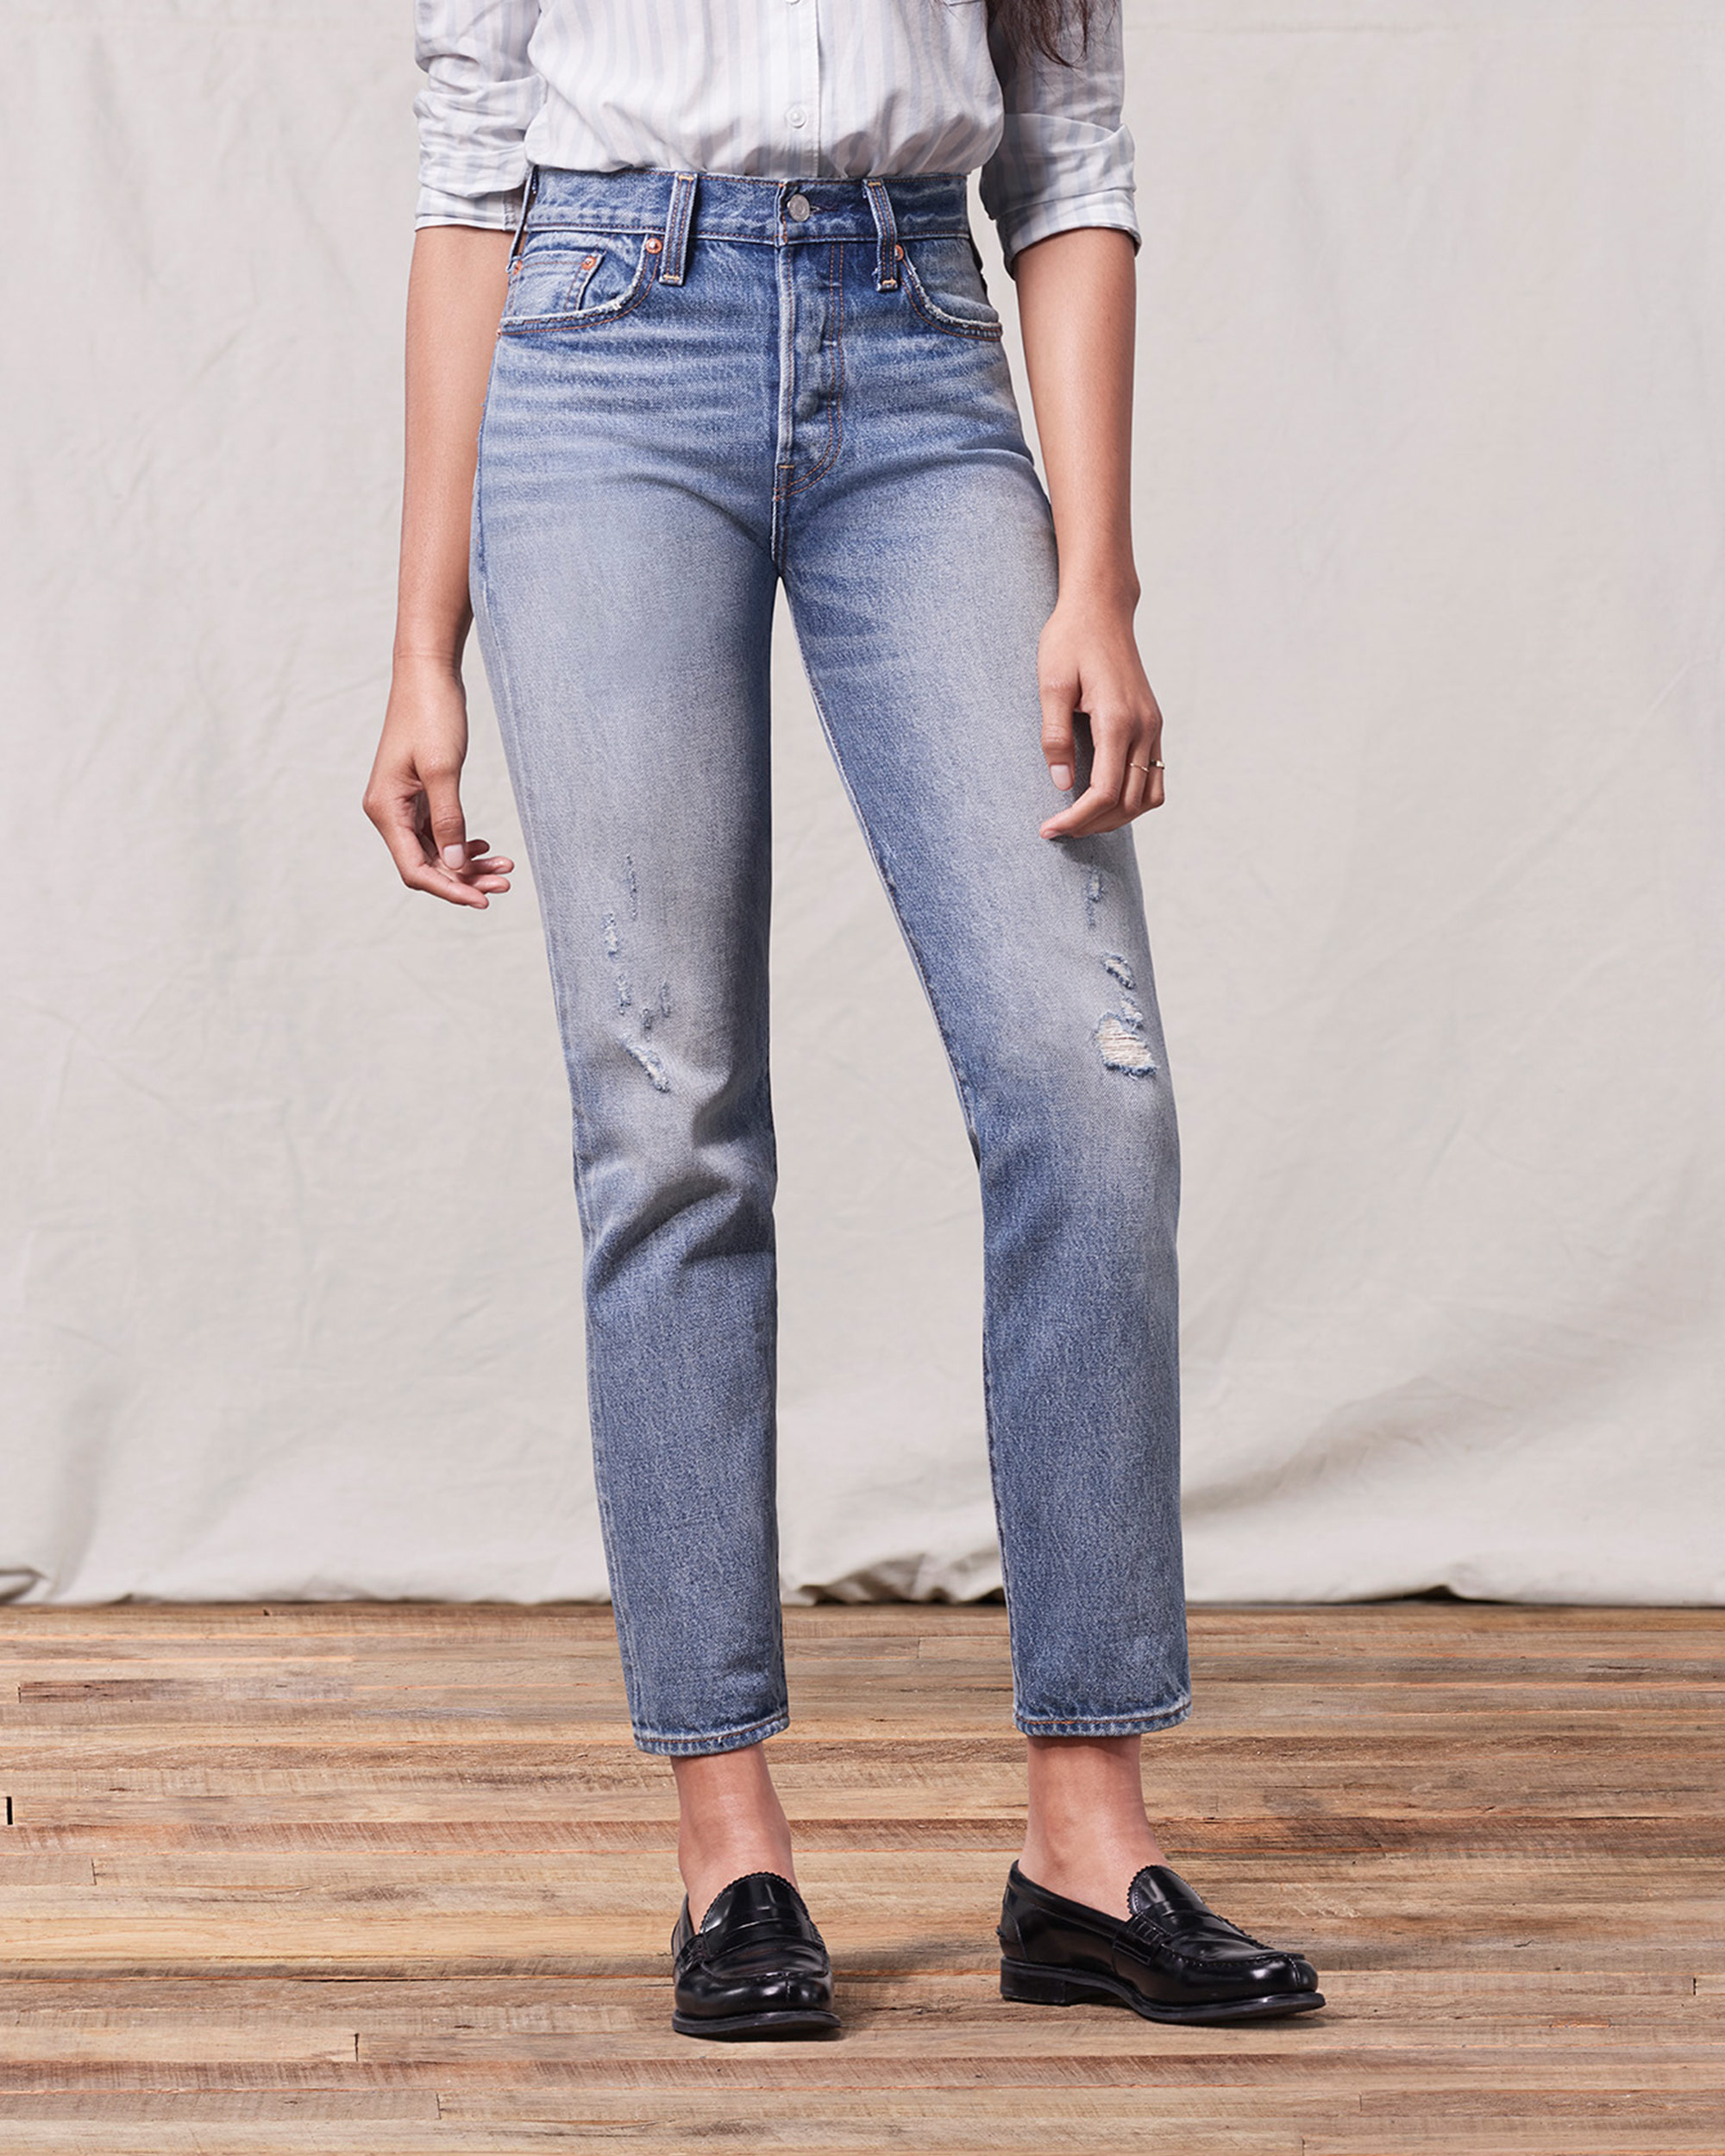 Levi's Wedgie Fit  Jeans  Collateral Damage NWT Style # 228610035 